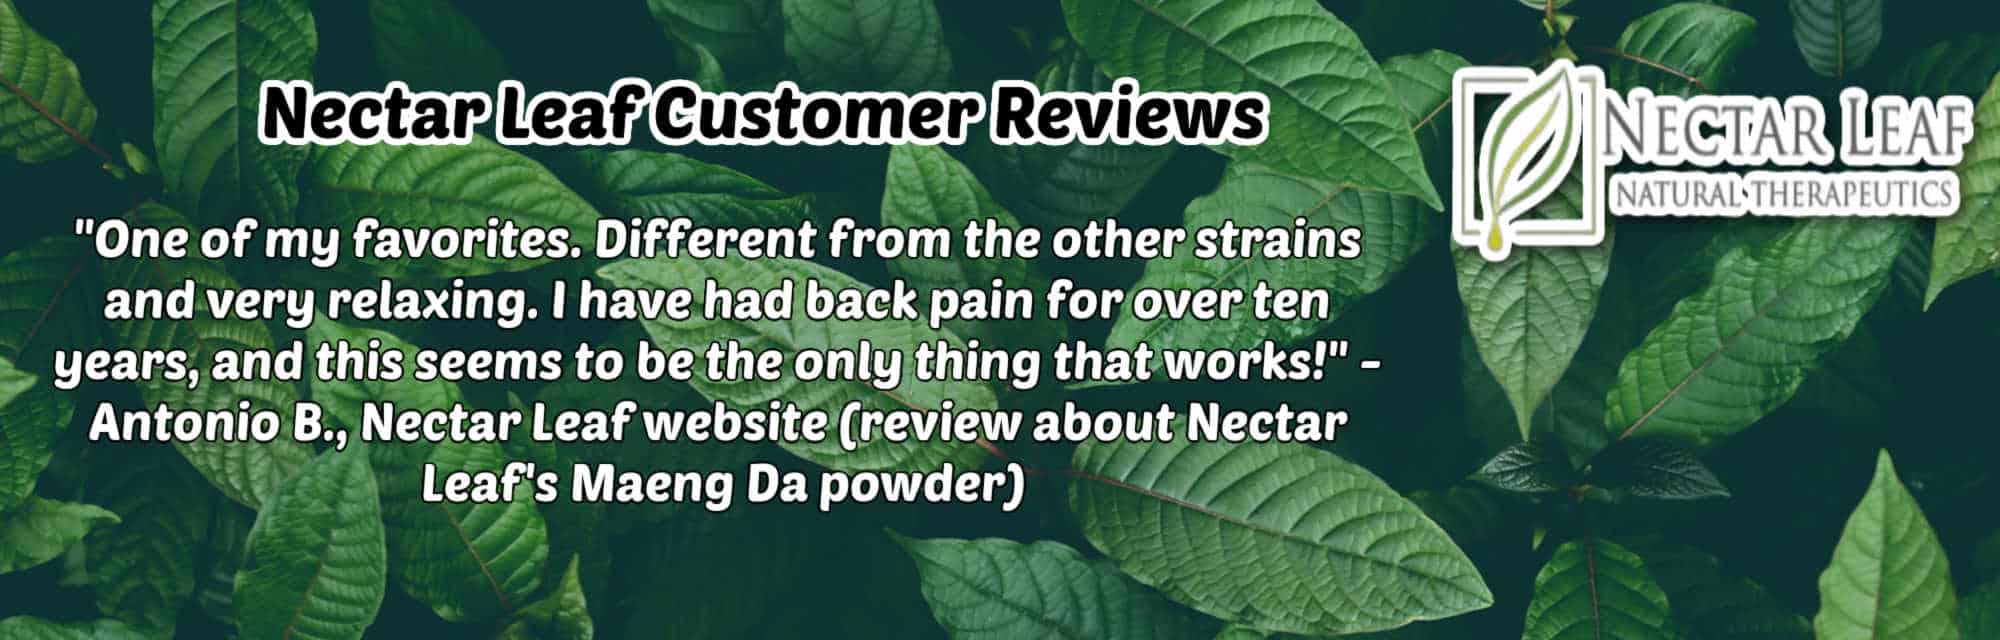 image of nectar leaf customer reviews